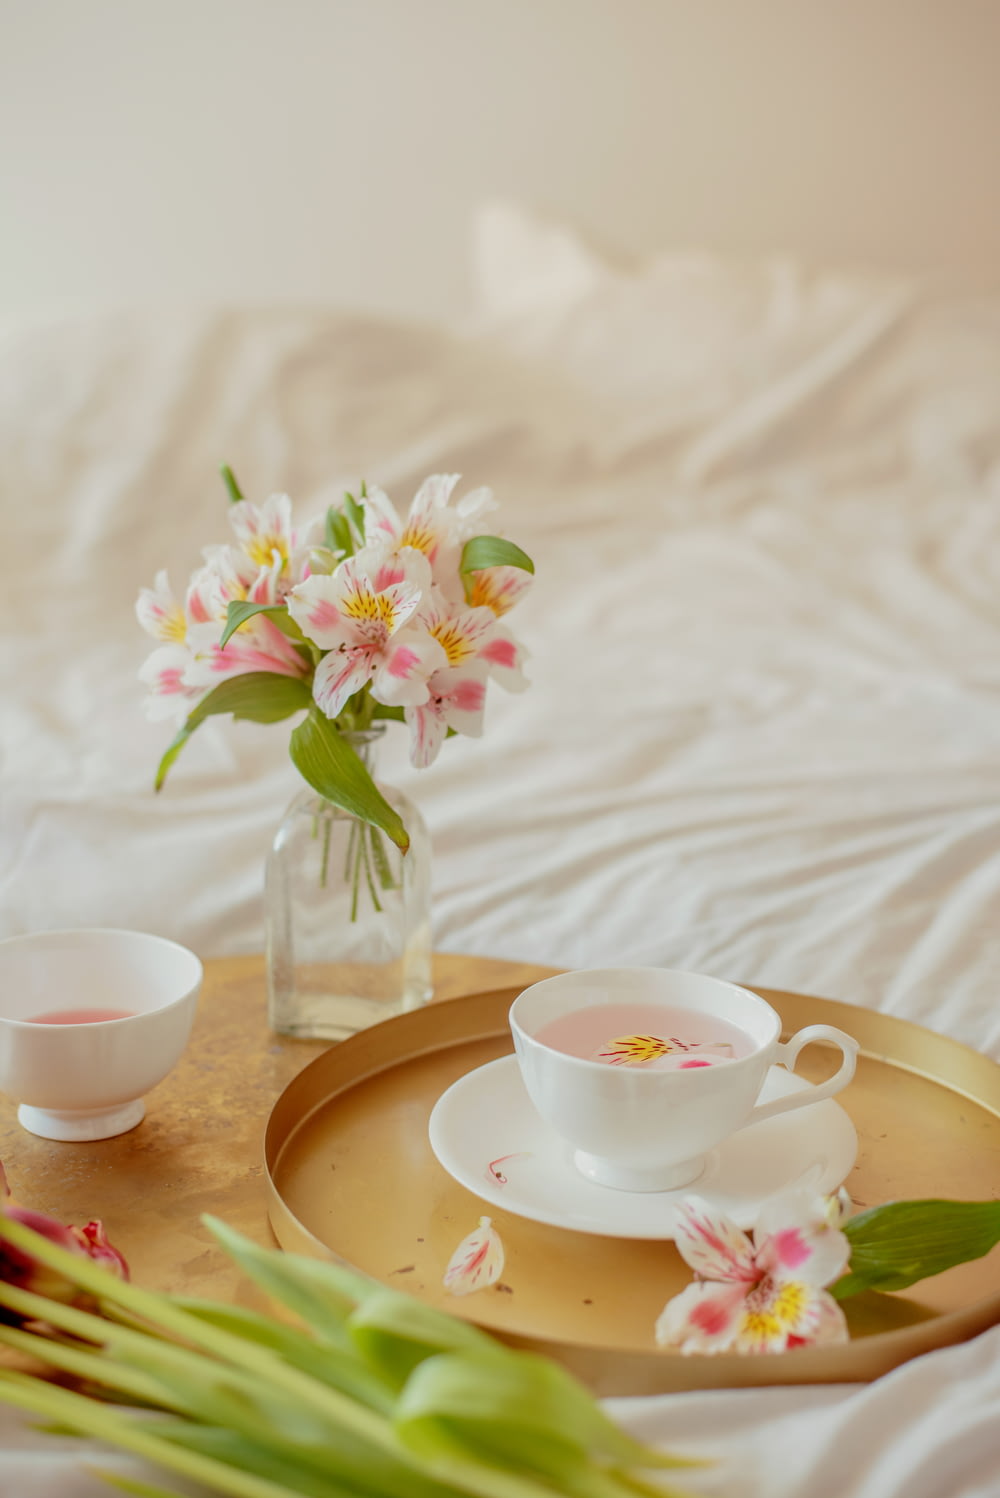 a tray with a cup and saucer and a vase with flowers